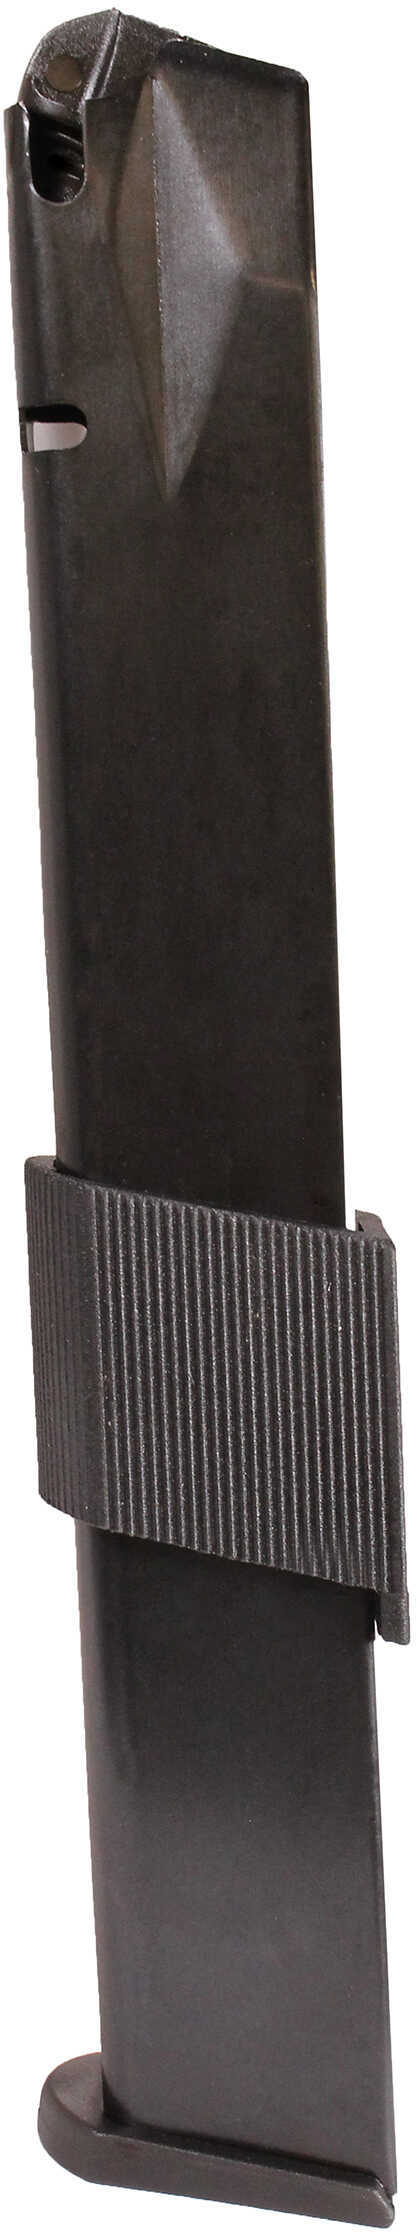 ProMag Canik TP9 Magazine 9mm, 32 Rounds, Blue Steel